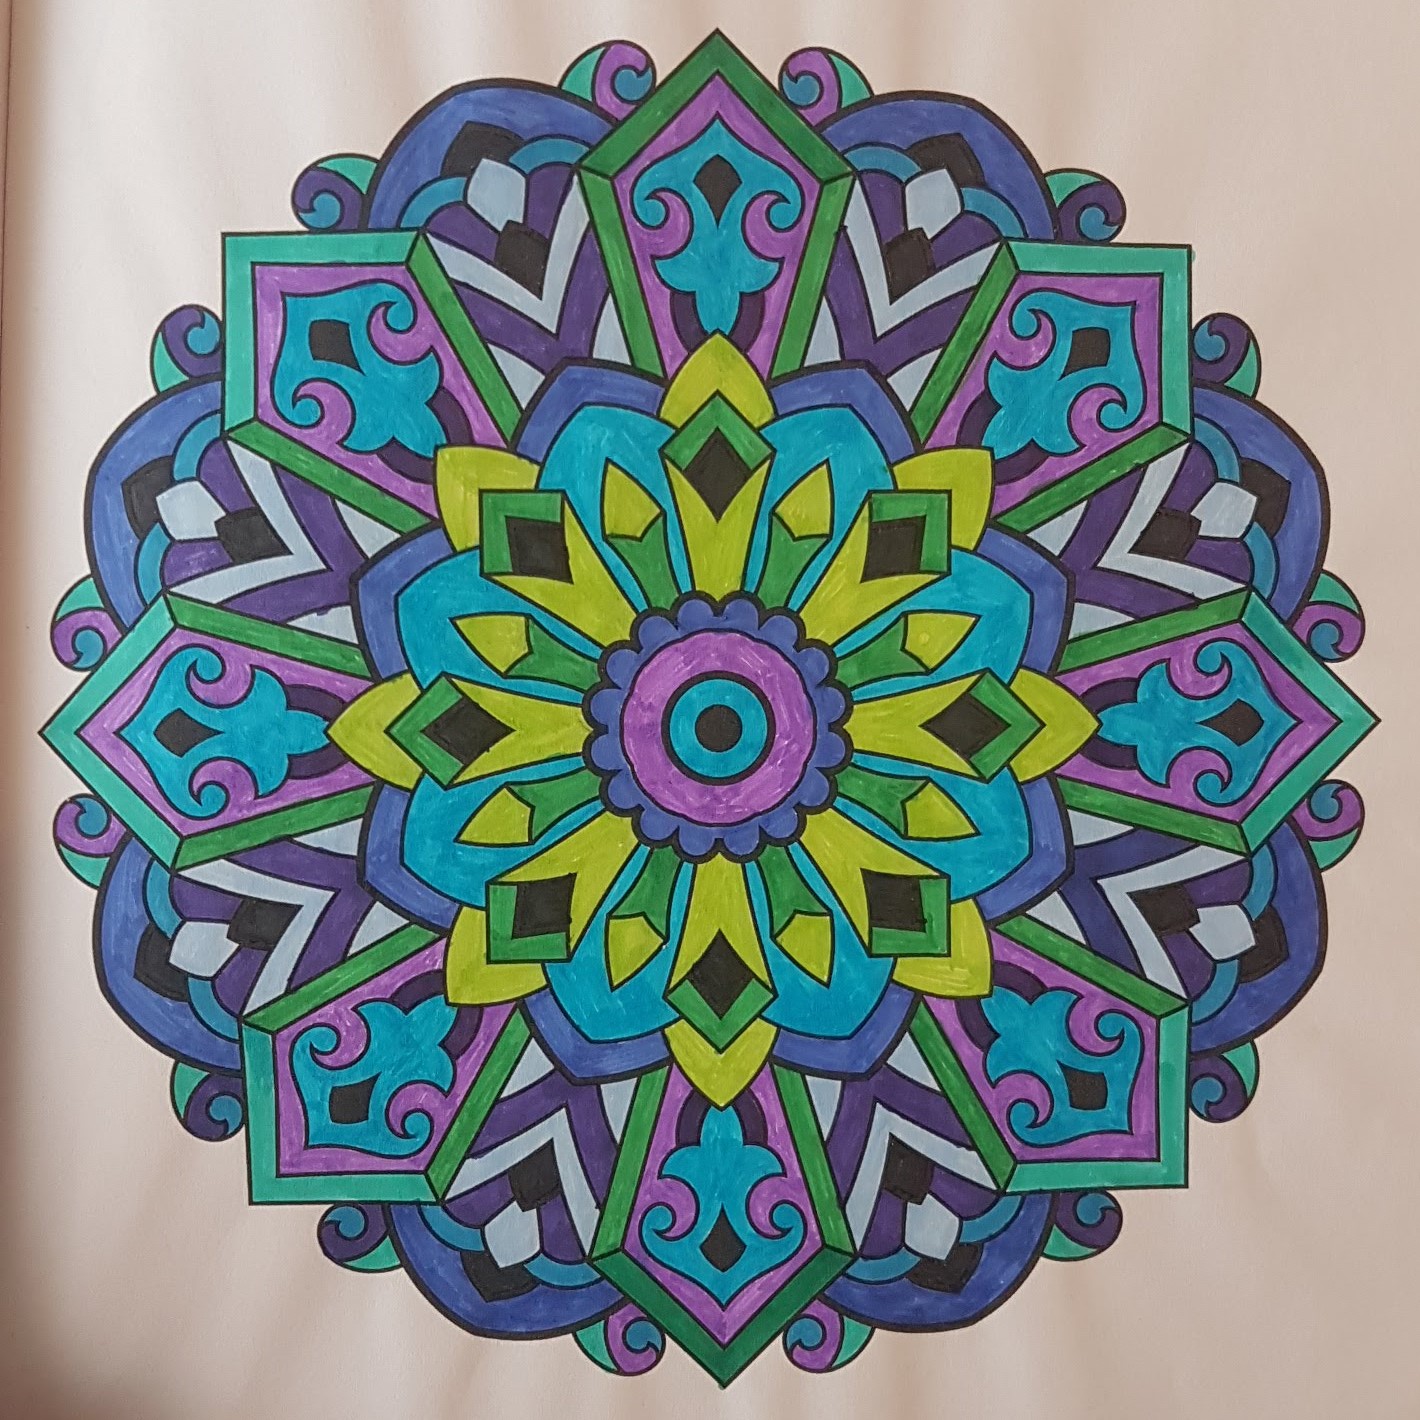 A mandala with purple circles in the center, with green spiky shoots around that, and purple and blue pendant shapes towards the outside